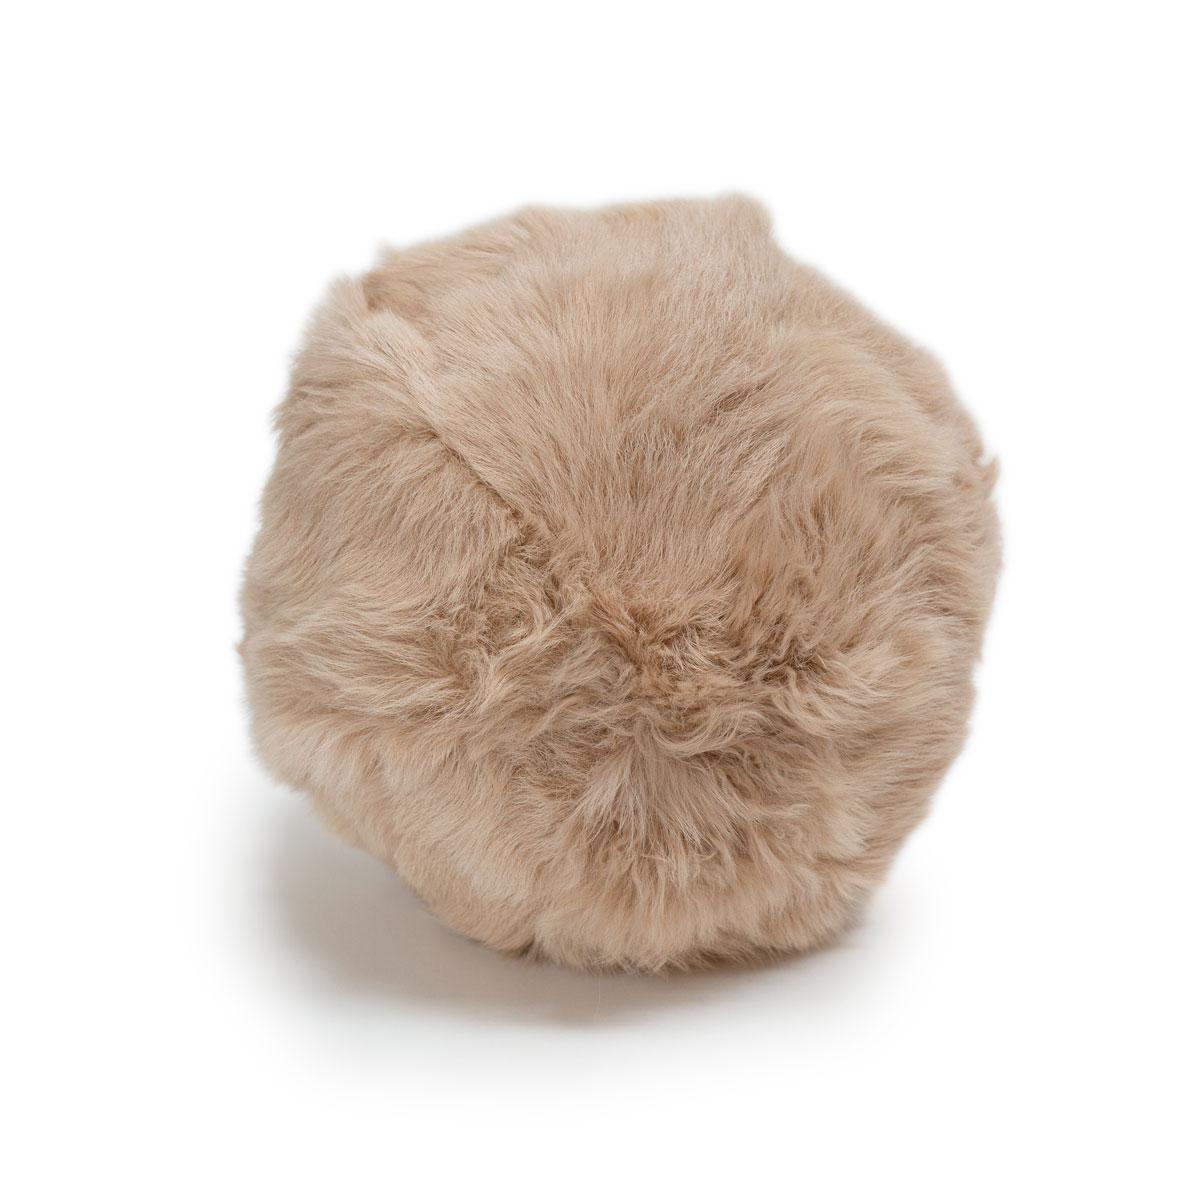 Hand-Crafted JG Switzer Toscana Real Fur Both Sides, Teddy Bear Pillow For Sale